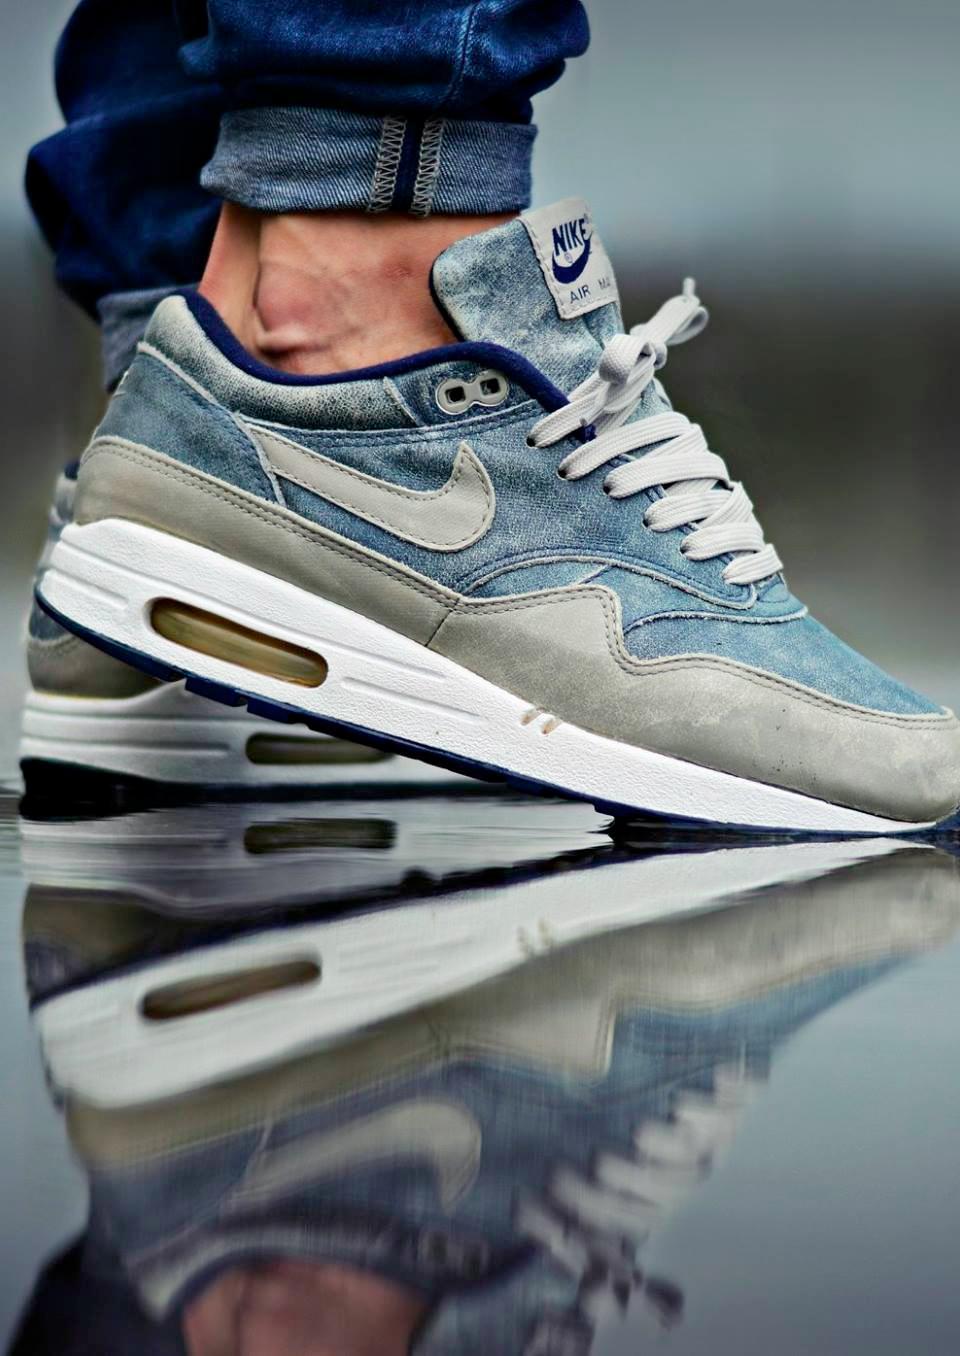 The World Of Shoes on Twitter: "Nike Max 1 'Dirty Denim #nike / Twitter